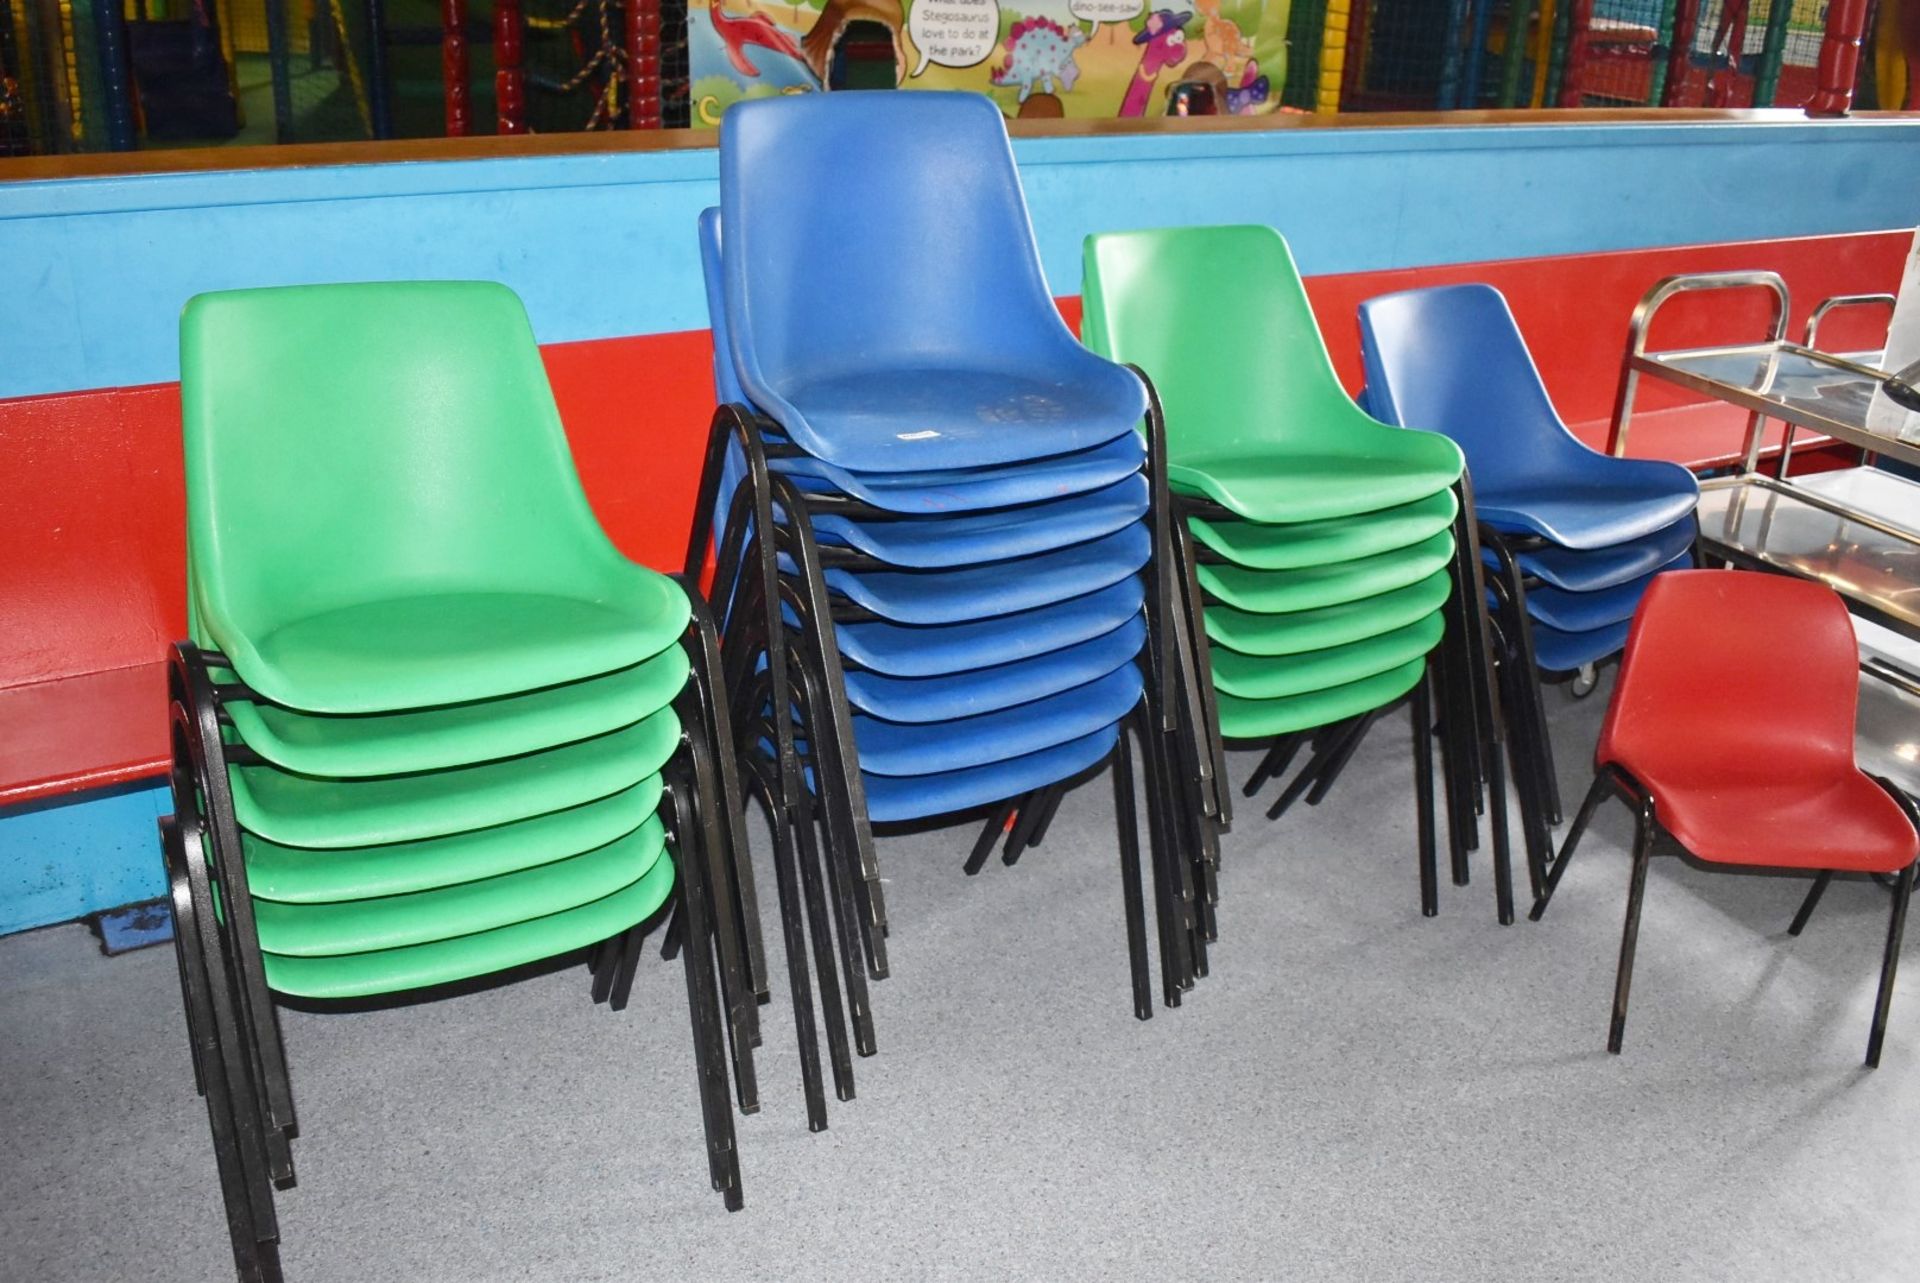 24 x Plastic Stackable Chairs With Black Metal Legs - Various Colours - Suitable For Adults or